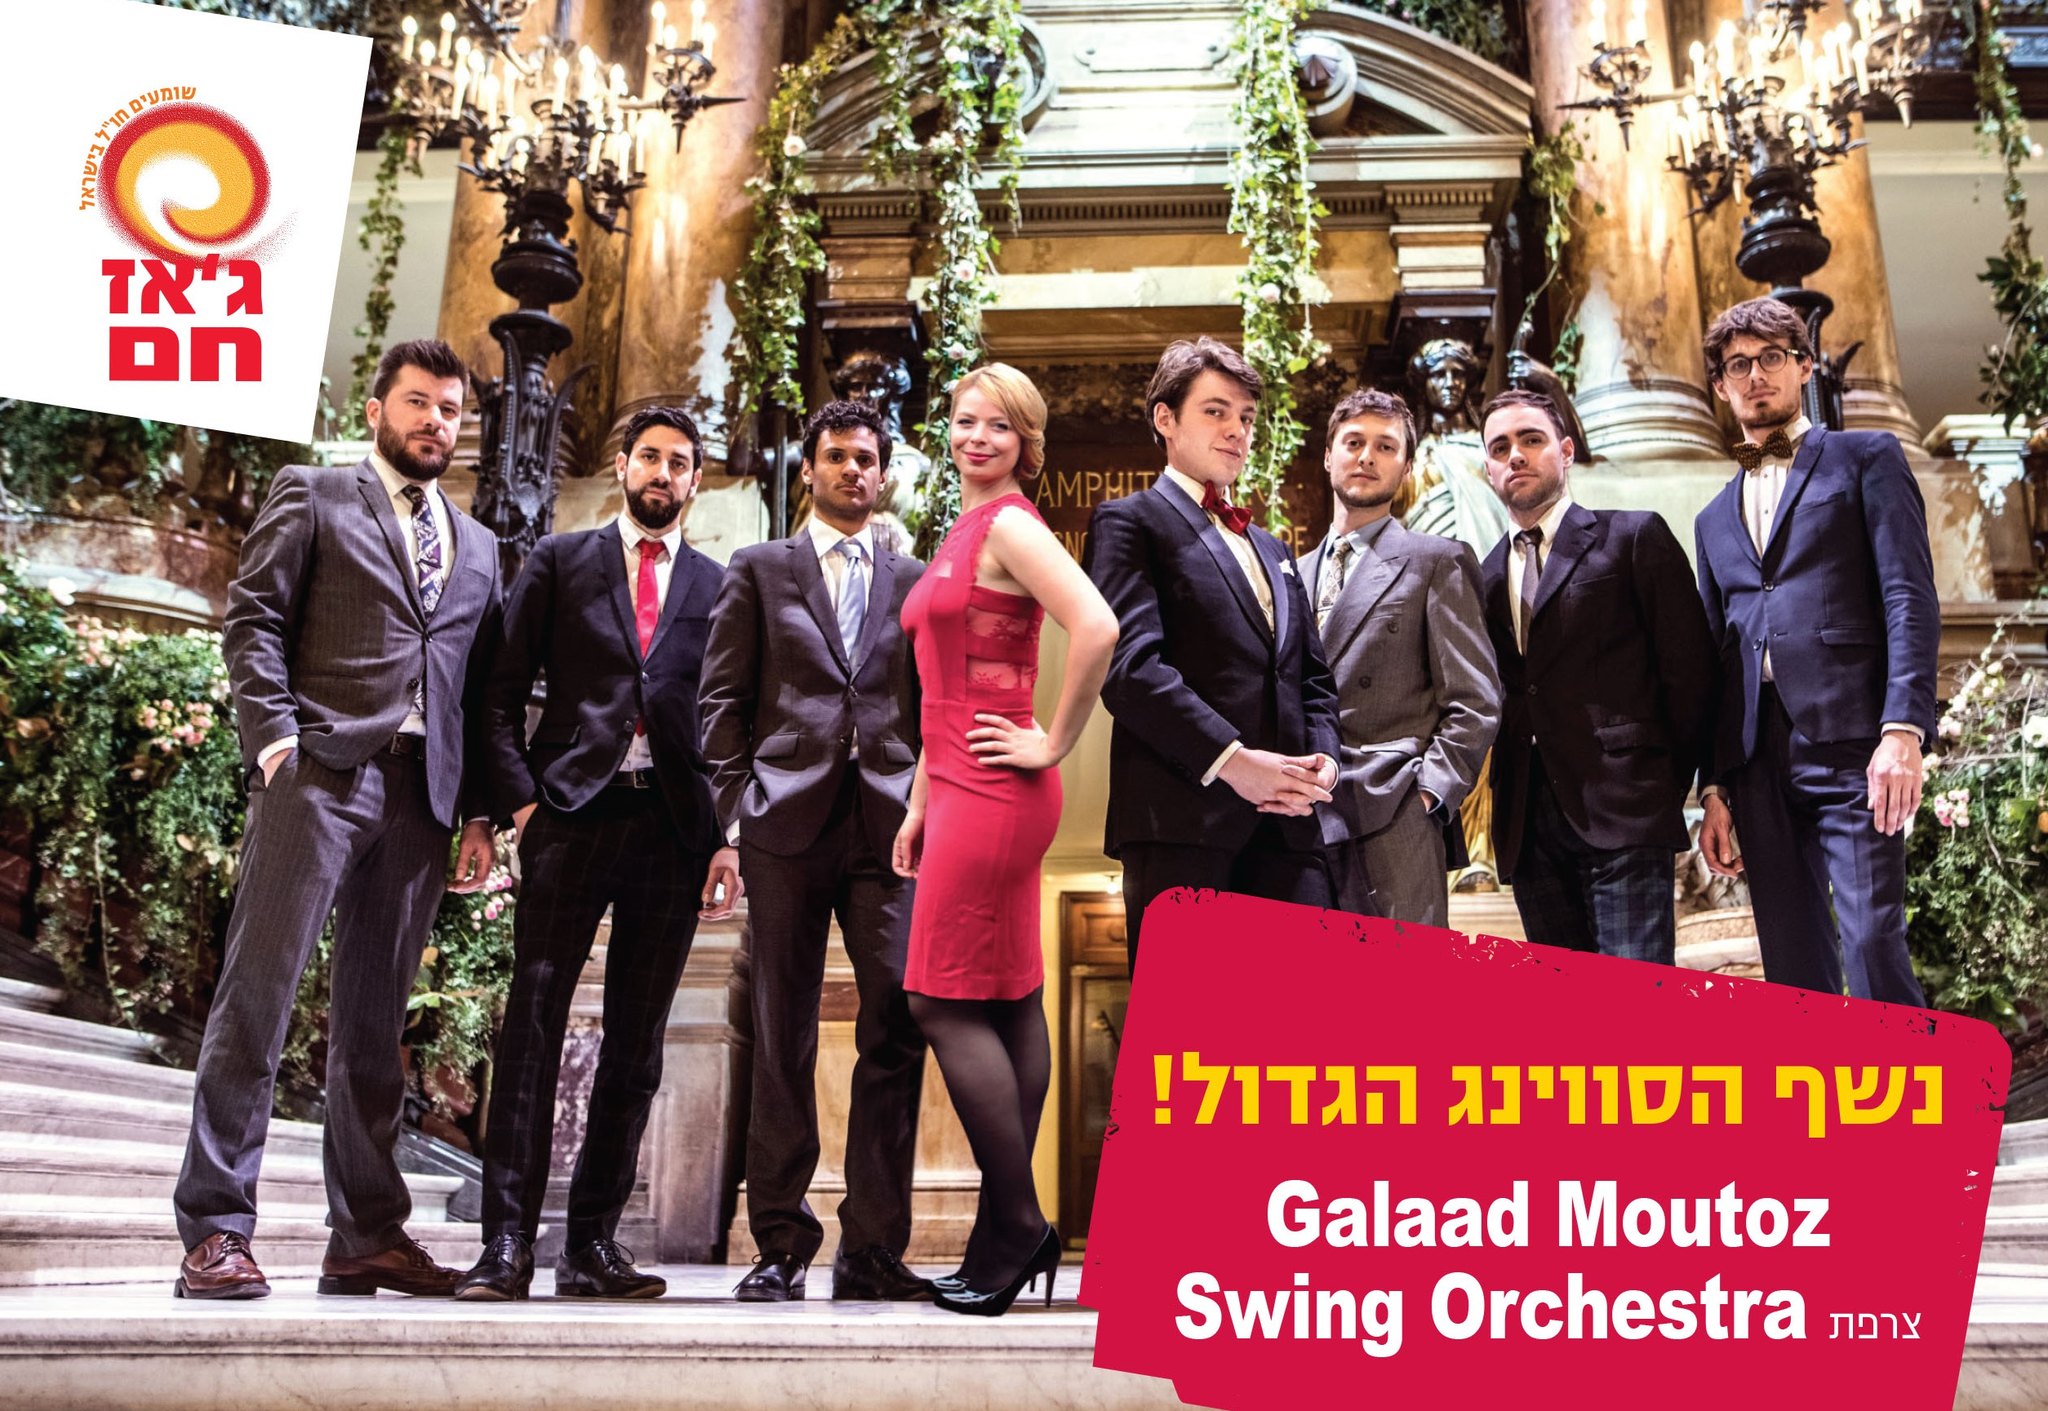 The Big Swing Ball with Galaad Moutoz Swing Orchestra (Paris) Hot Jazz!